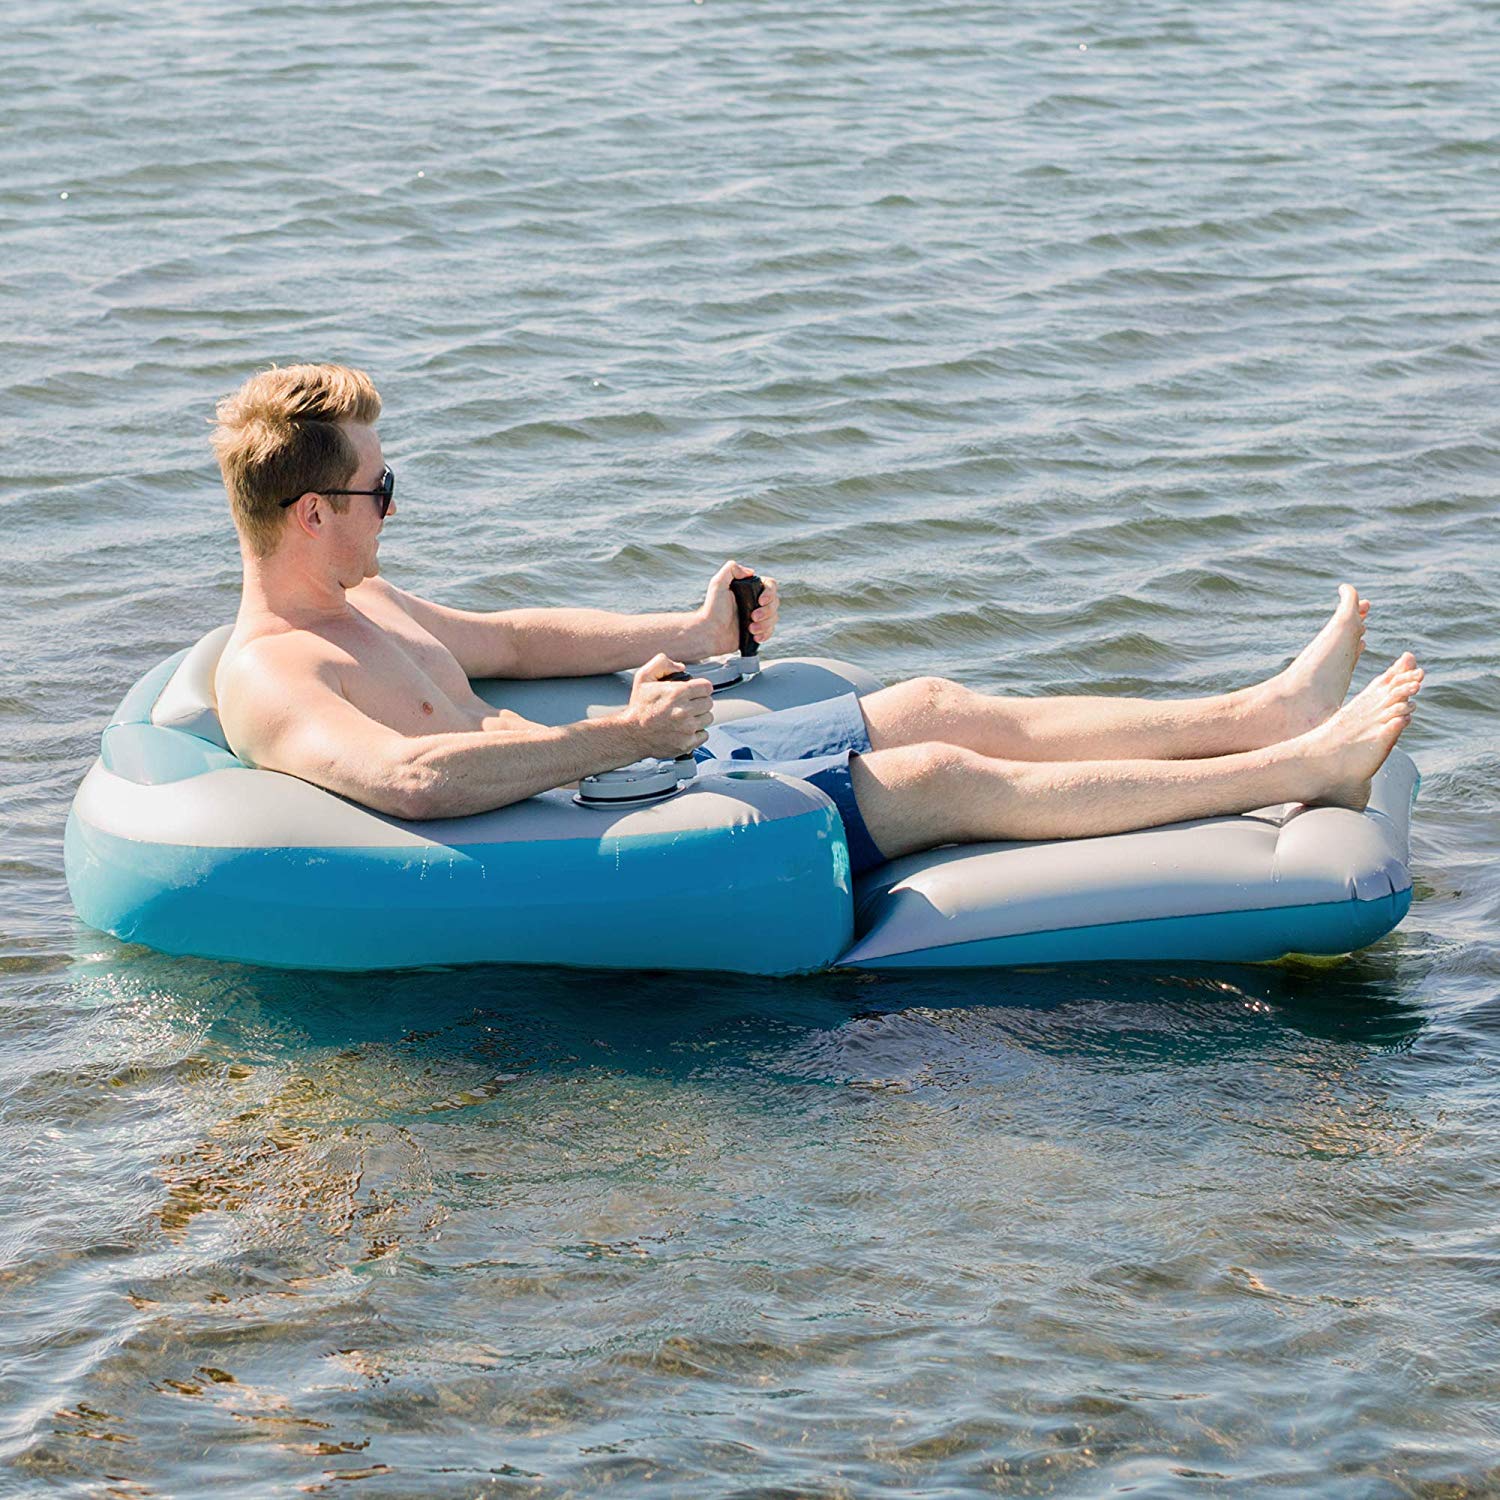 This Motorized Pool Lounger Will Let You Cruise Around Like A Millionaire